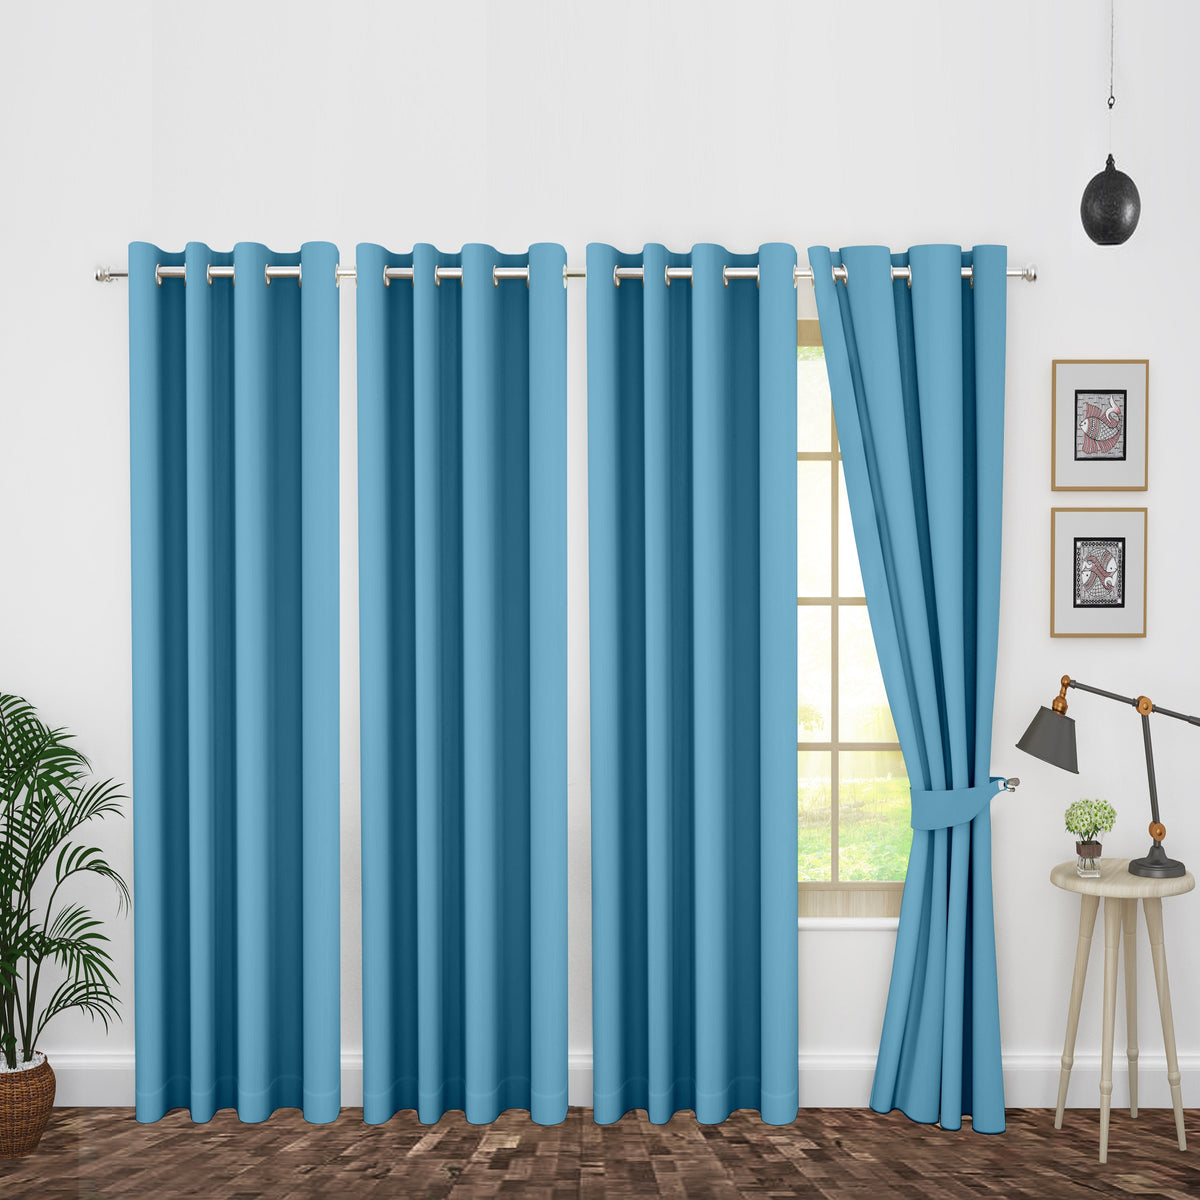 Blackout Curtains - Pack of 4